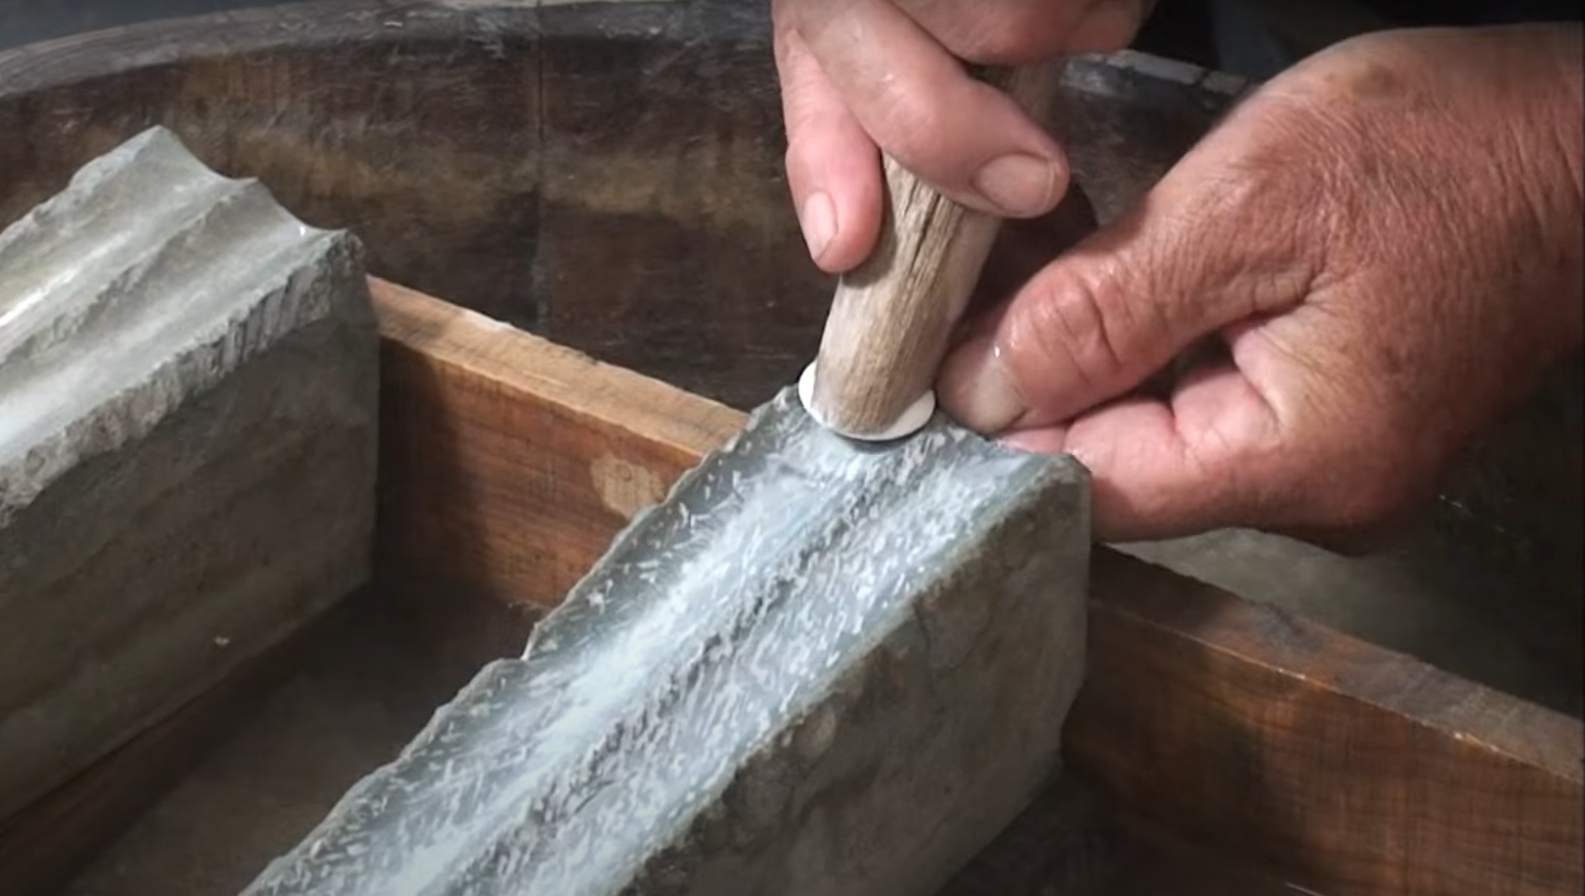 A person using a hammer to grind a stone

Description automatically generated